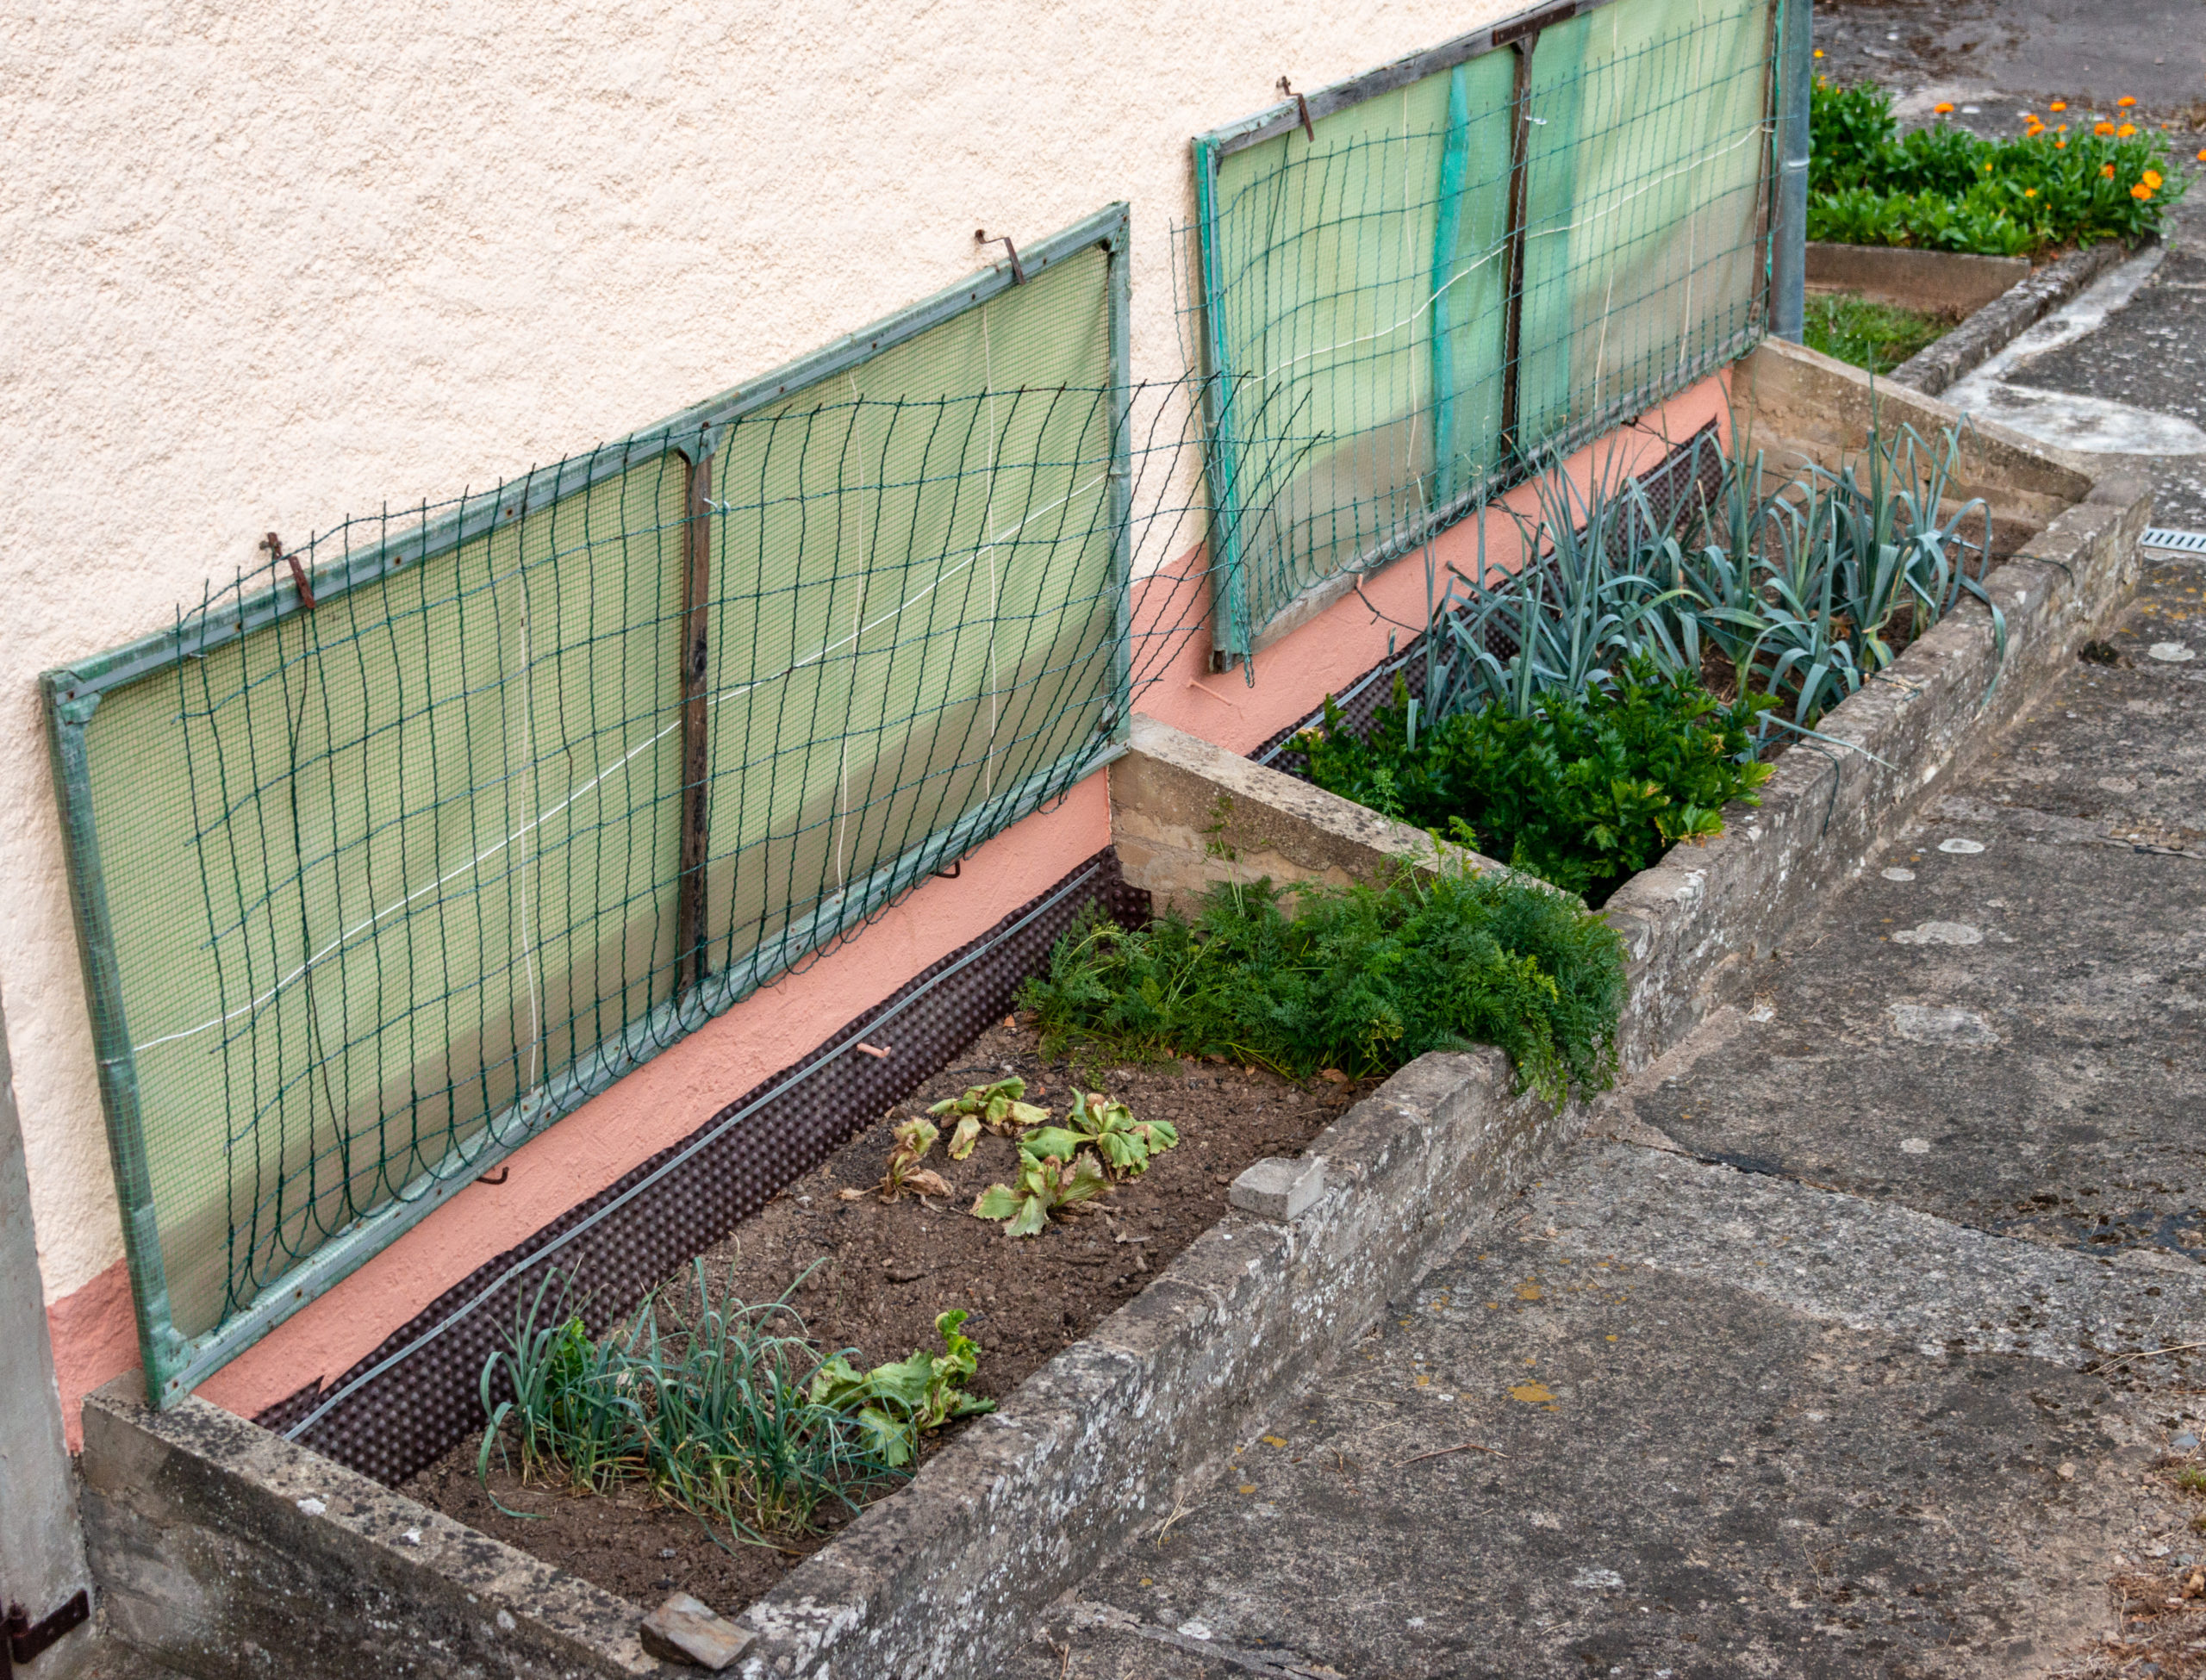 Cold frames can be made of materials that are easily available.  This one is built against a structural south wall with the side and front walls being made of cemented Belgian block. The glazing is made from a plastic covered mesh with wire added for additional winter support against snow loads.  JWH AT WIKIPEDIA LUXEMBOURG, CC BY-SA 3.0 LU, https://commons.wikimedia.org/w/index.php?curid=72325630